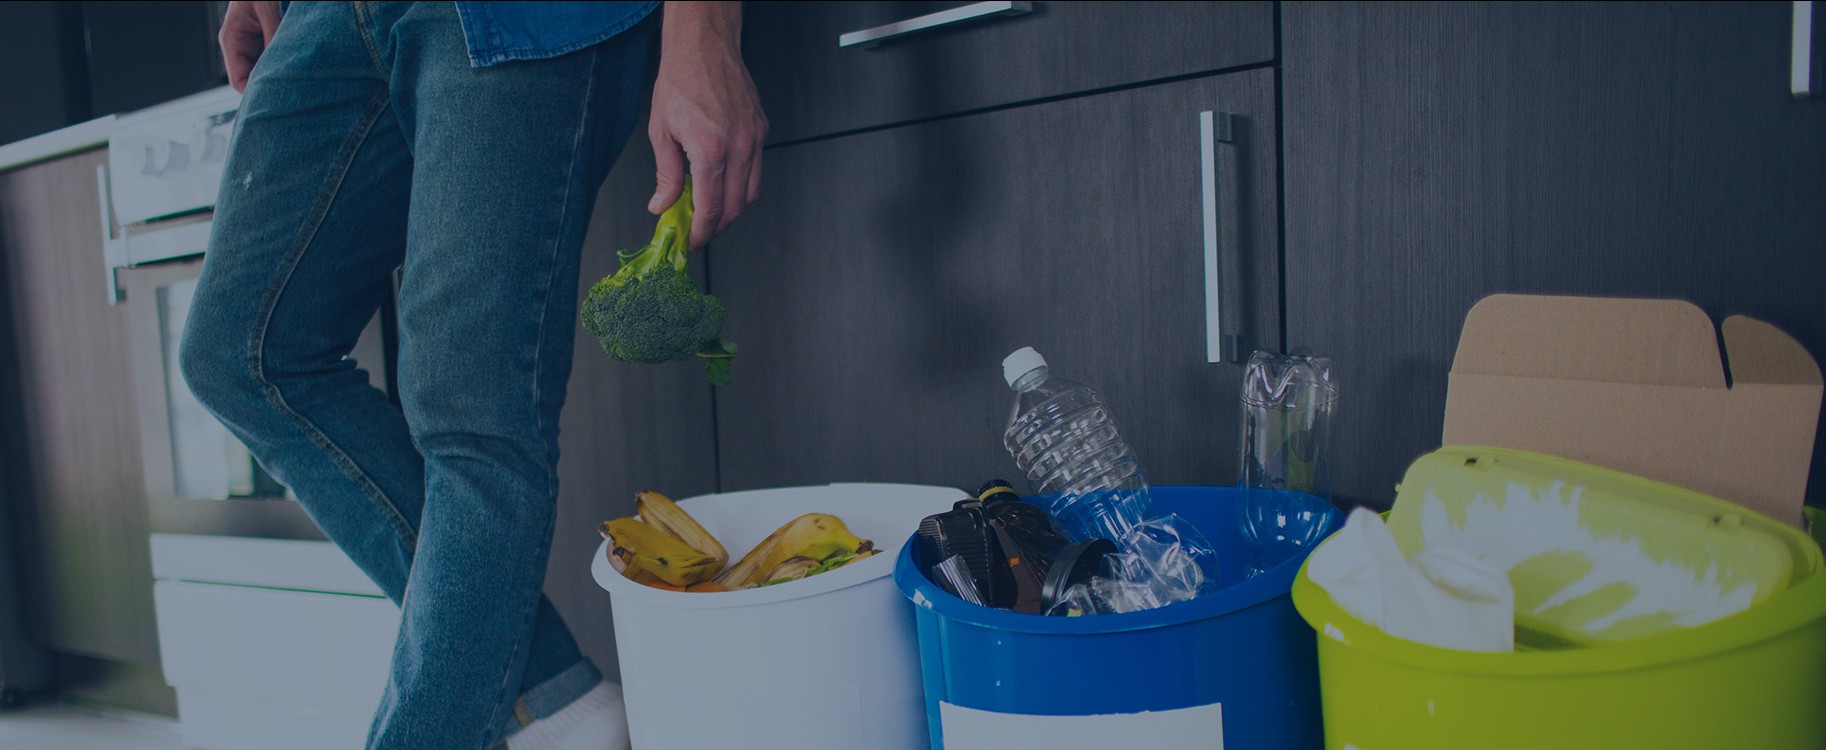 Man putting paper, plastic bottles, and organic waste into recycling bins in his kitchen.